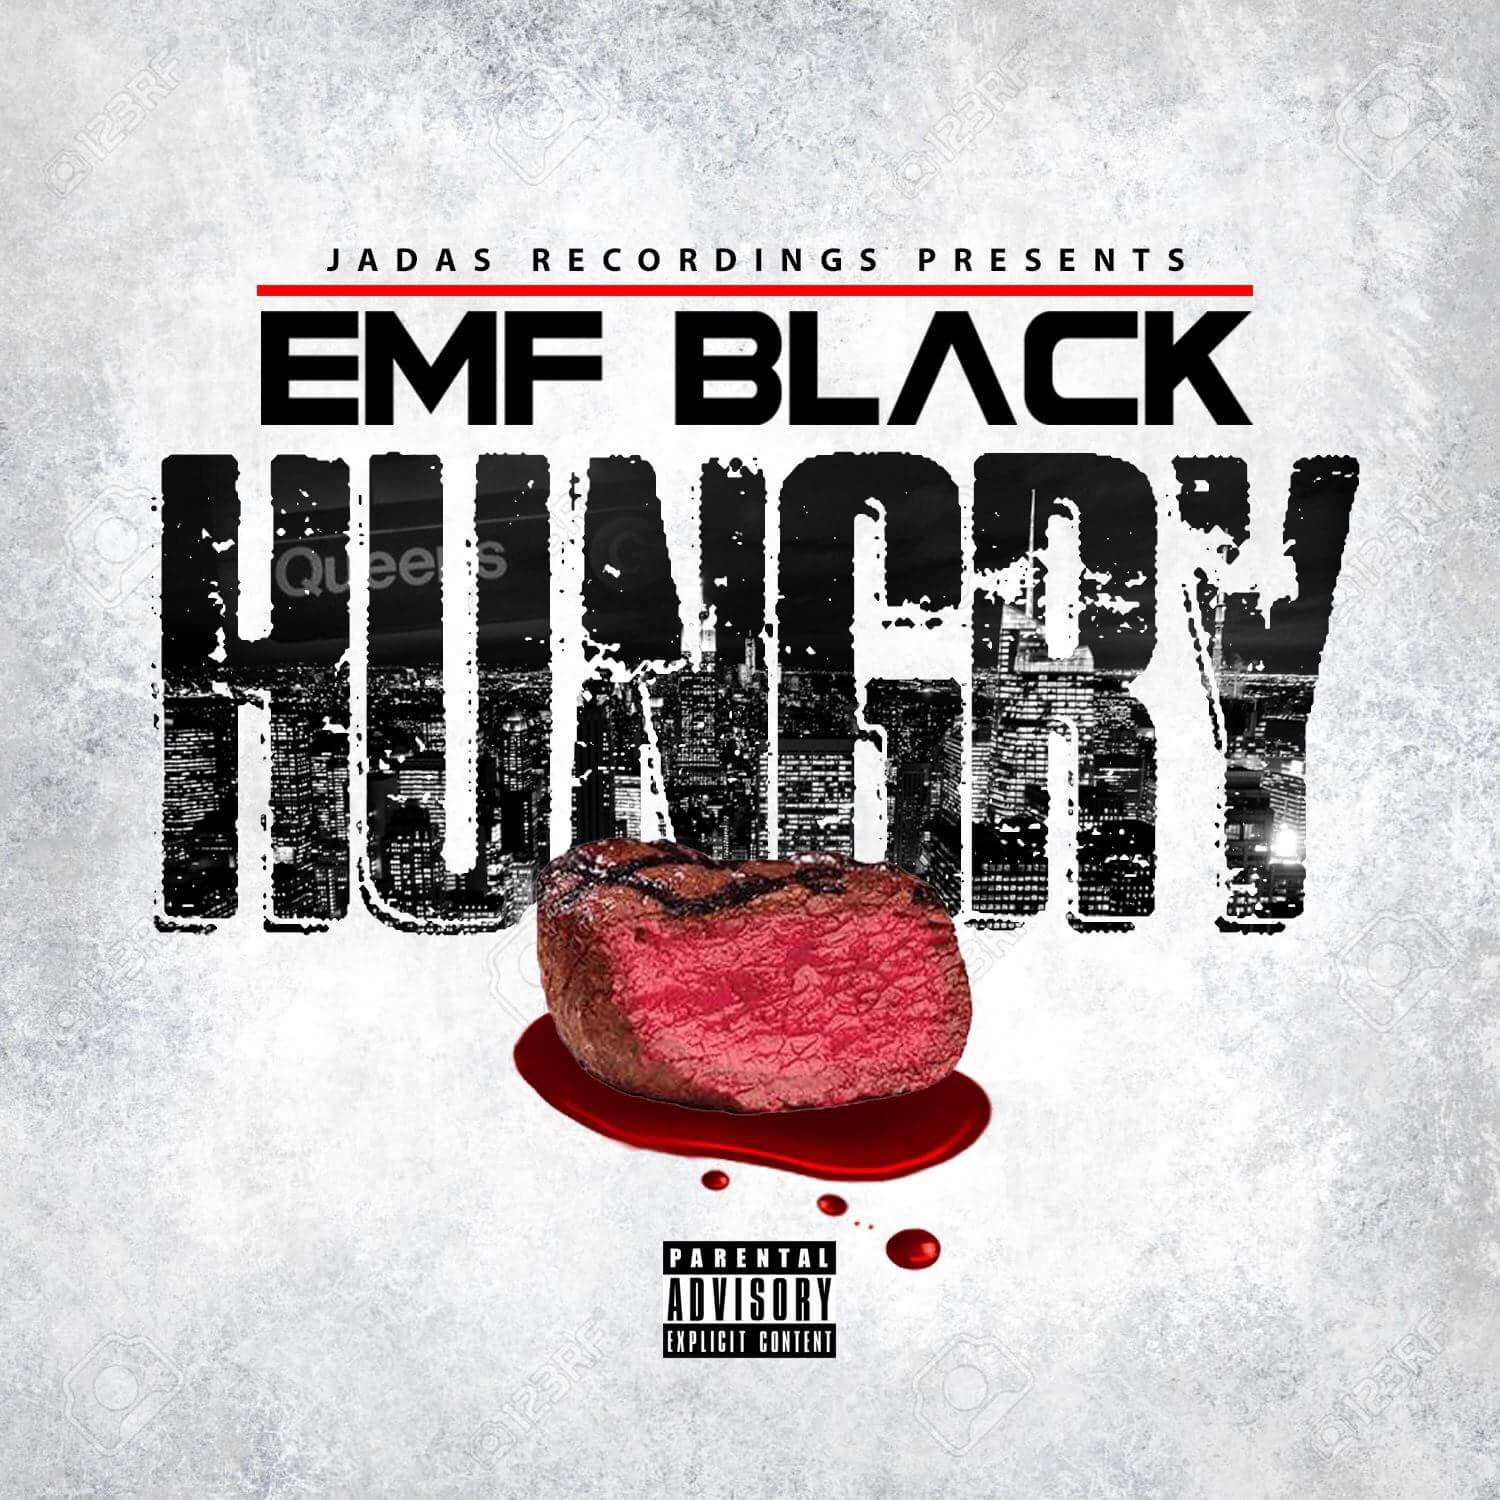 The Grynd Report Reviews new single “Hungry” by @emf_black